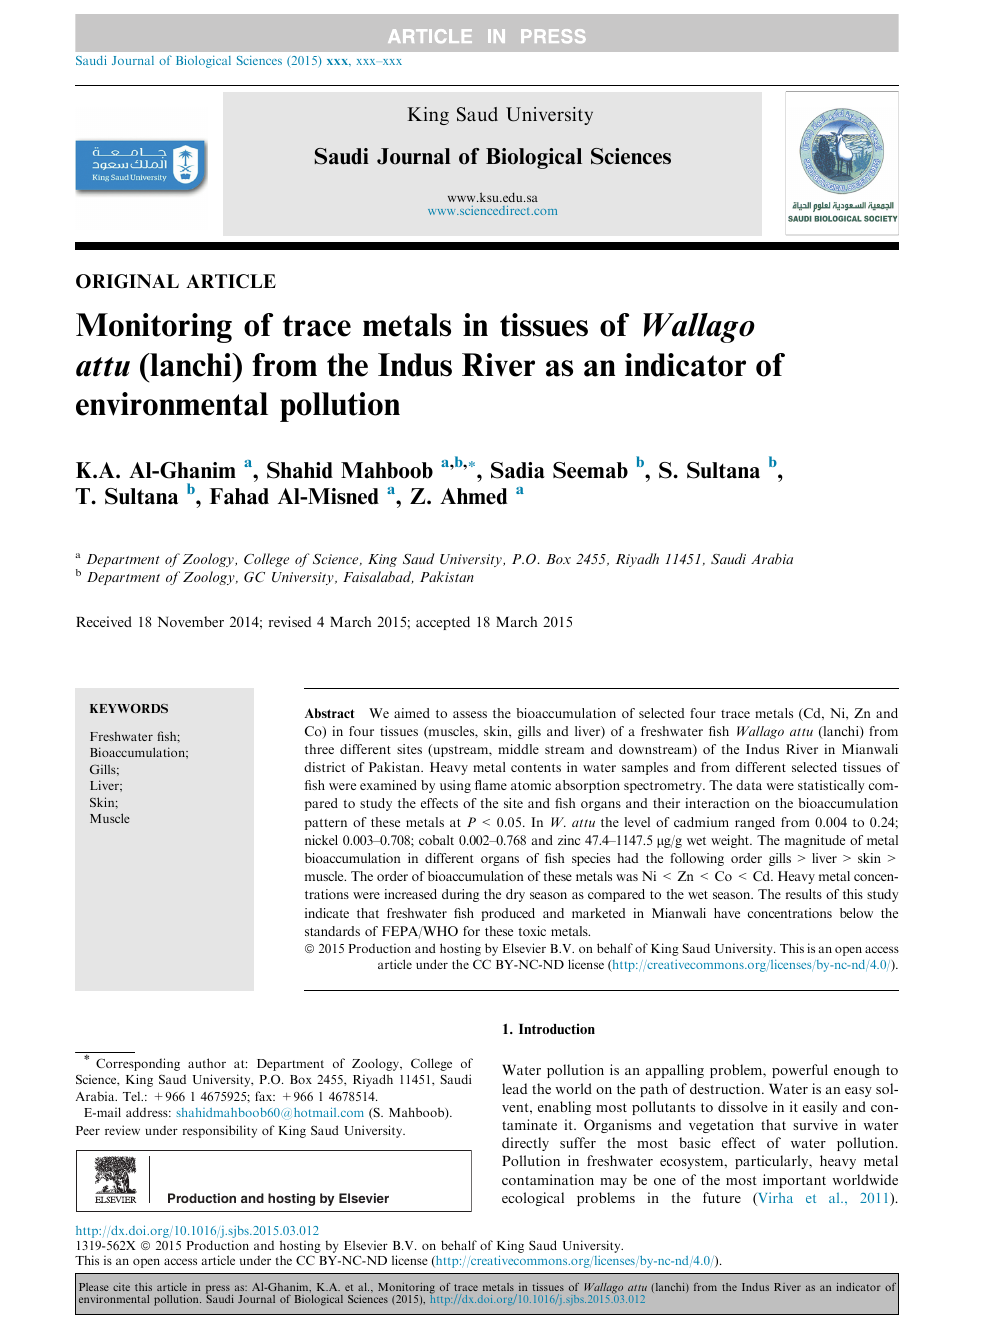 Monitoring Of Trace Metals In Tissues Of Wallago Attu Lanchi From The Indus River As An Indicator Of Environmental Pollution Topic Of Research Paper In Chemical Sciences Download Scholarly Article Pdf